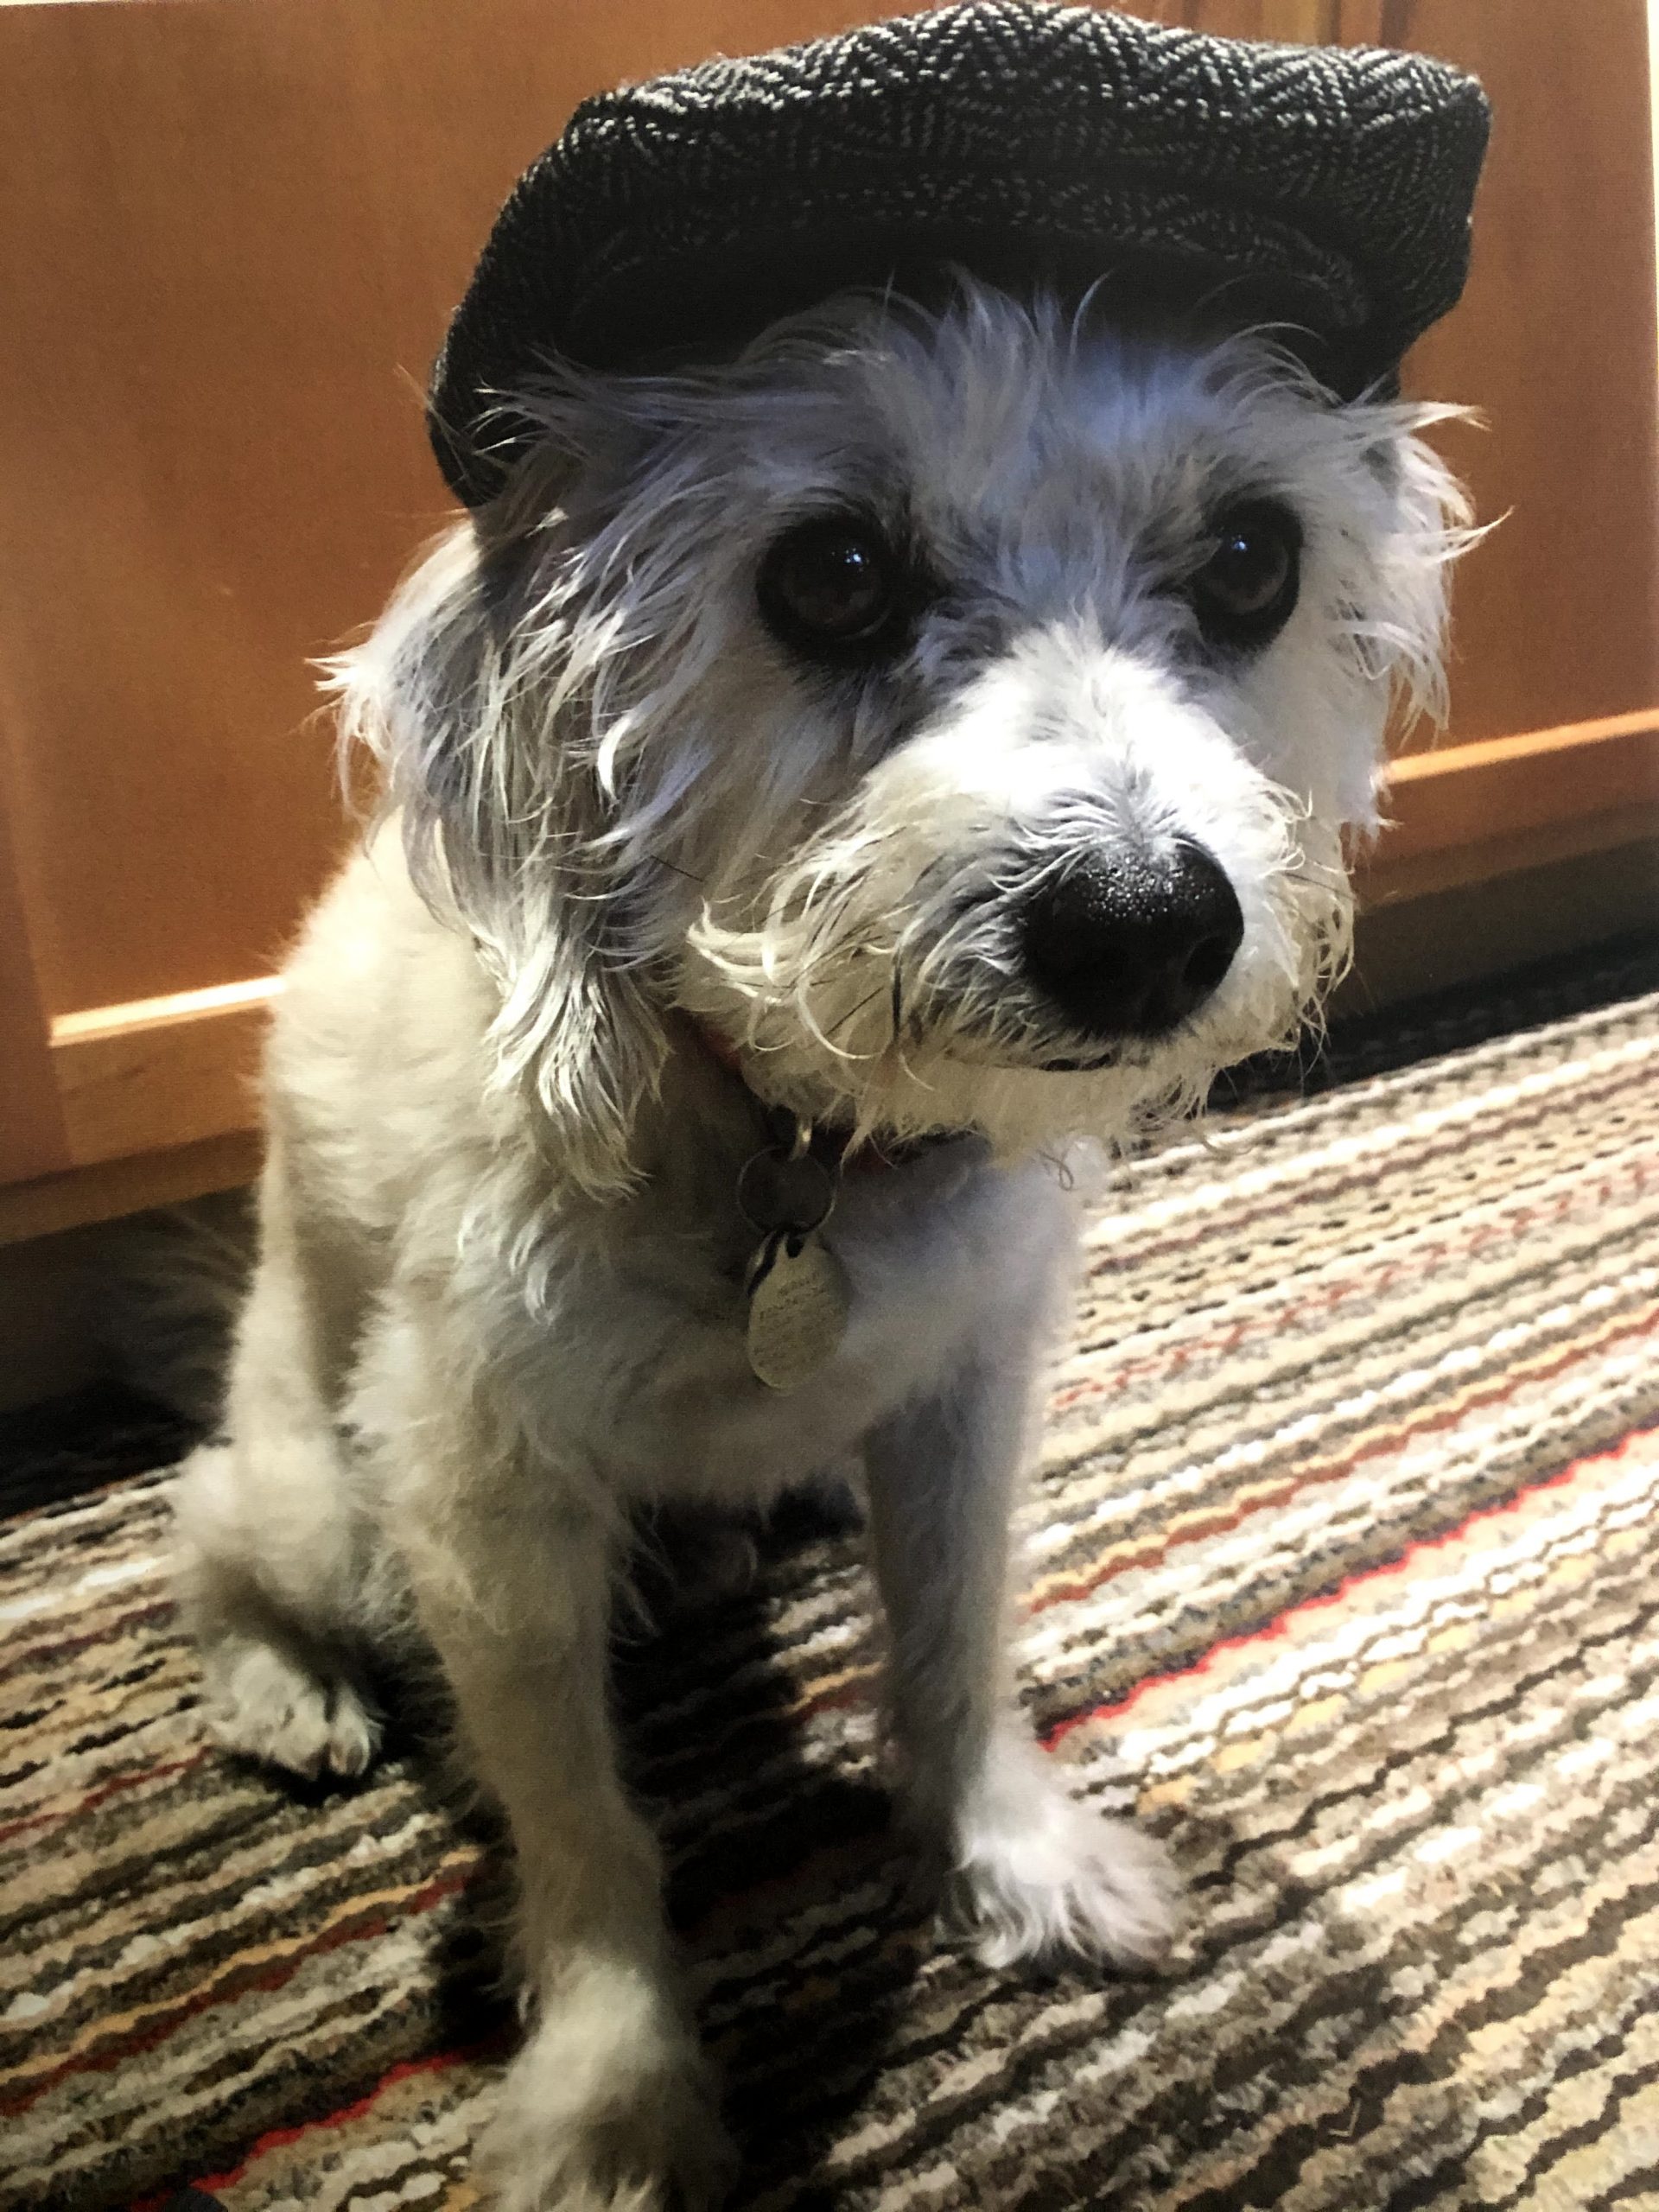 Murray the dog in a driver's cap